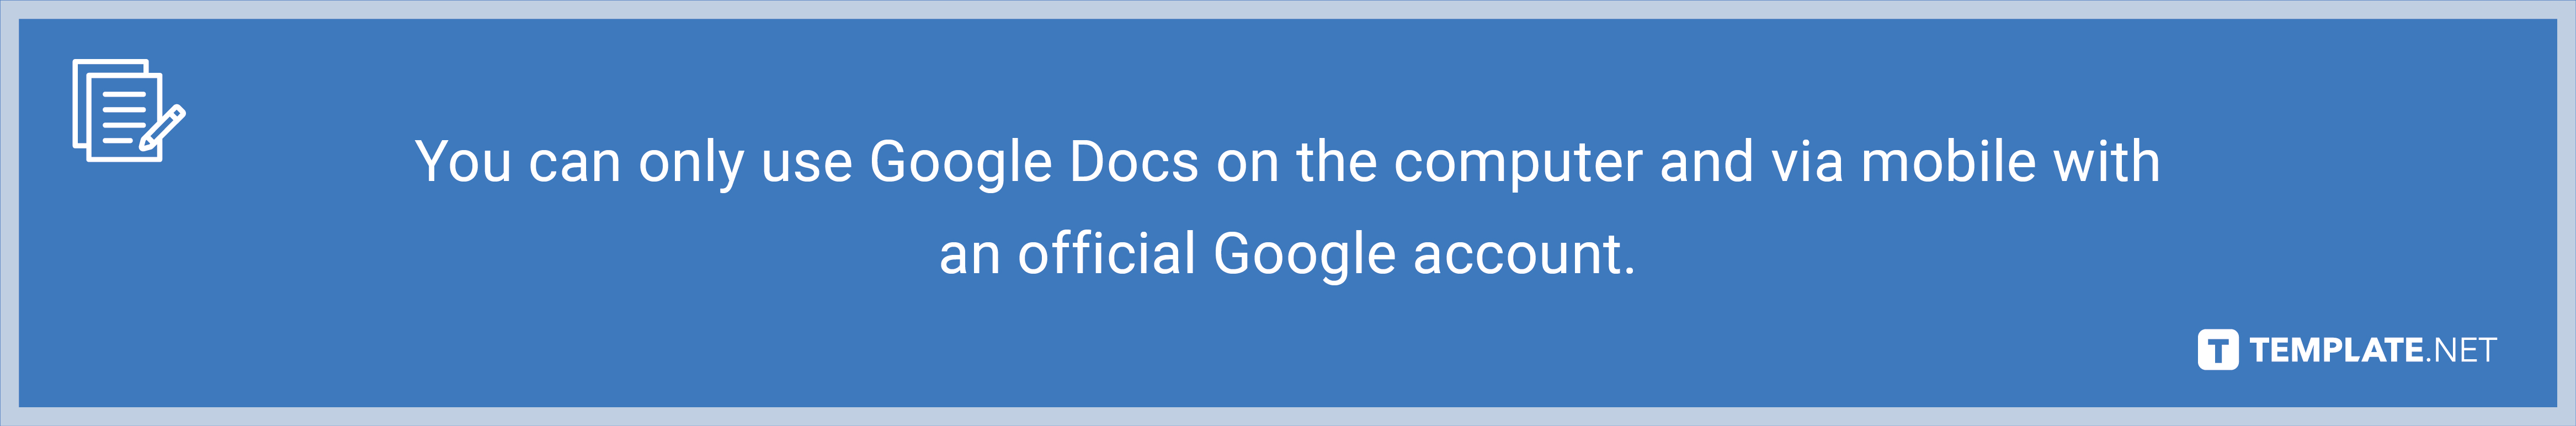 how-to-rotate-images-in-google-docs-dialog-box